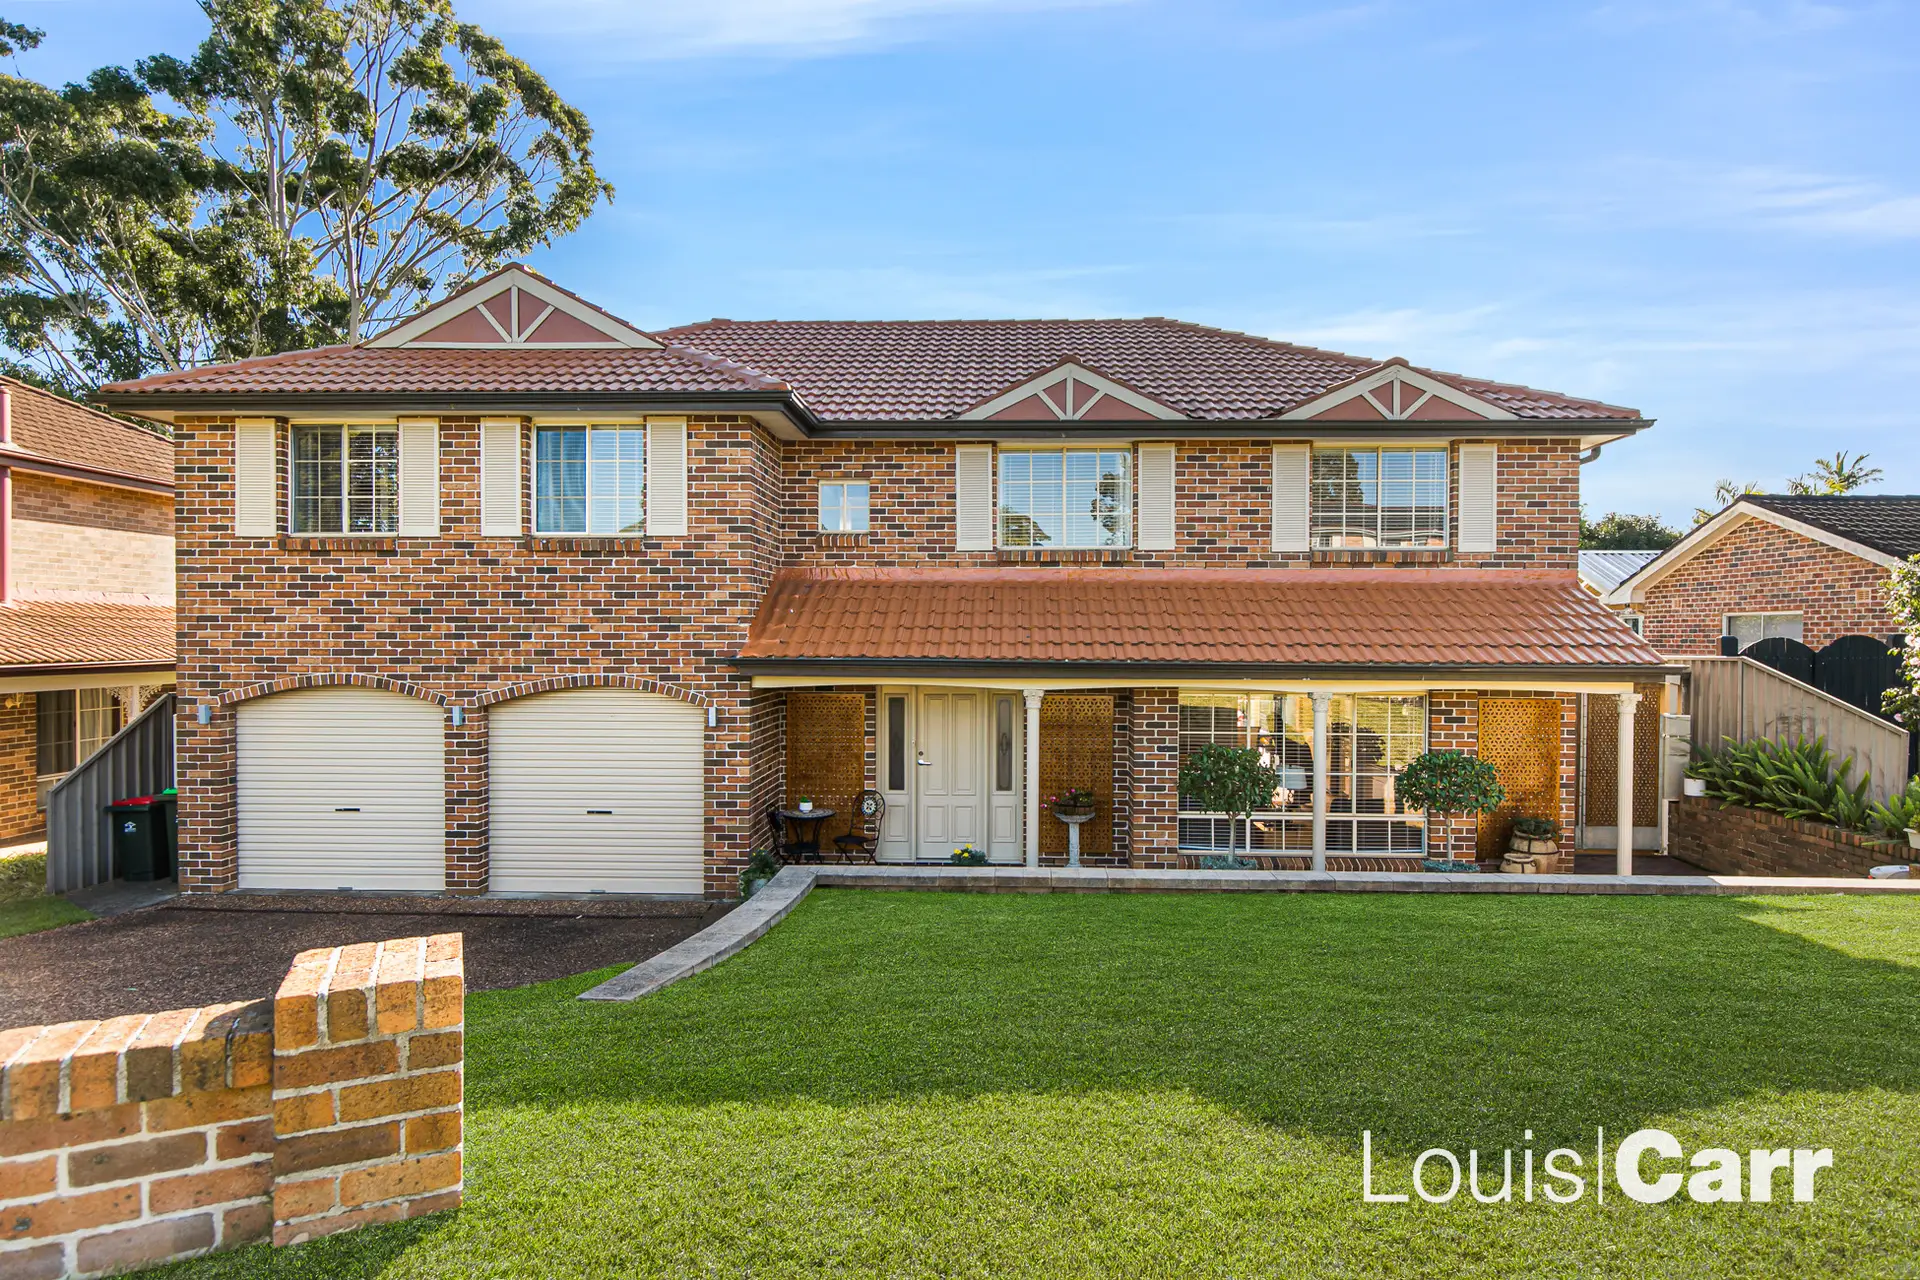 Photo #1: 195 Purchase Road, Cherrybrook - Sold by Louis Carr Real Estate